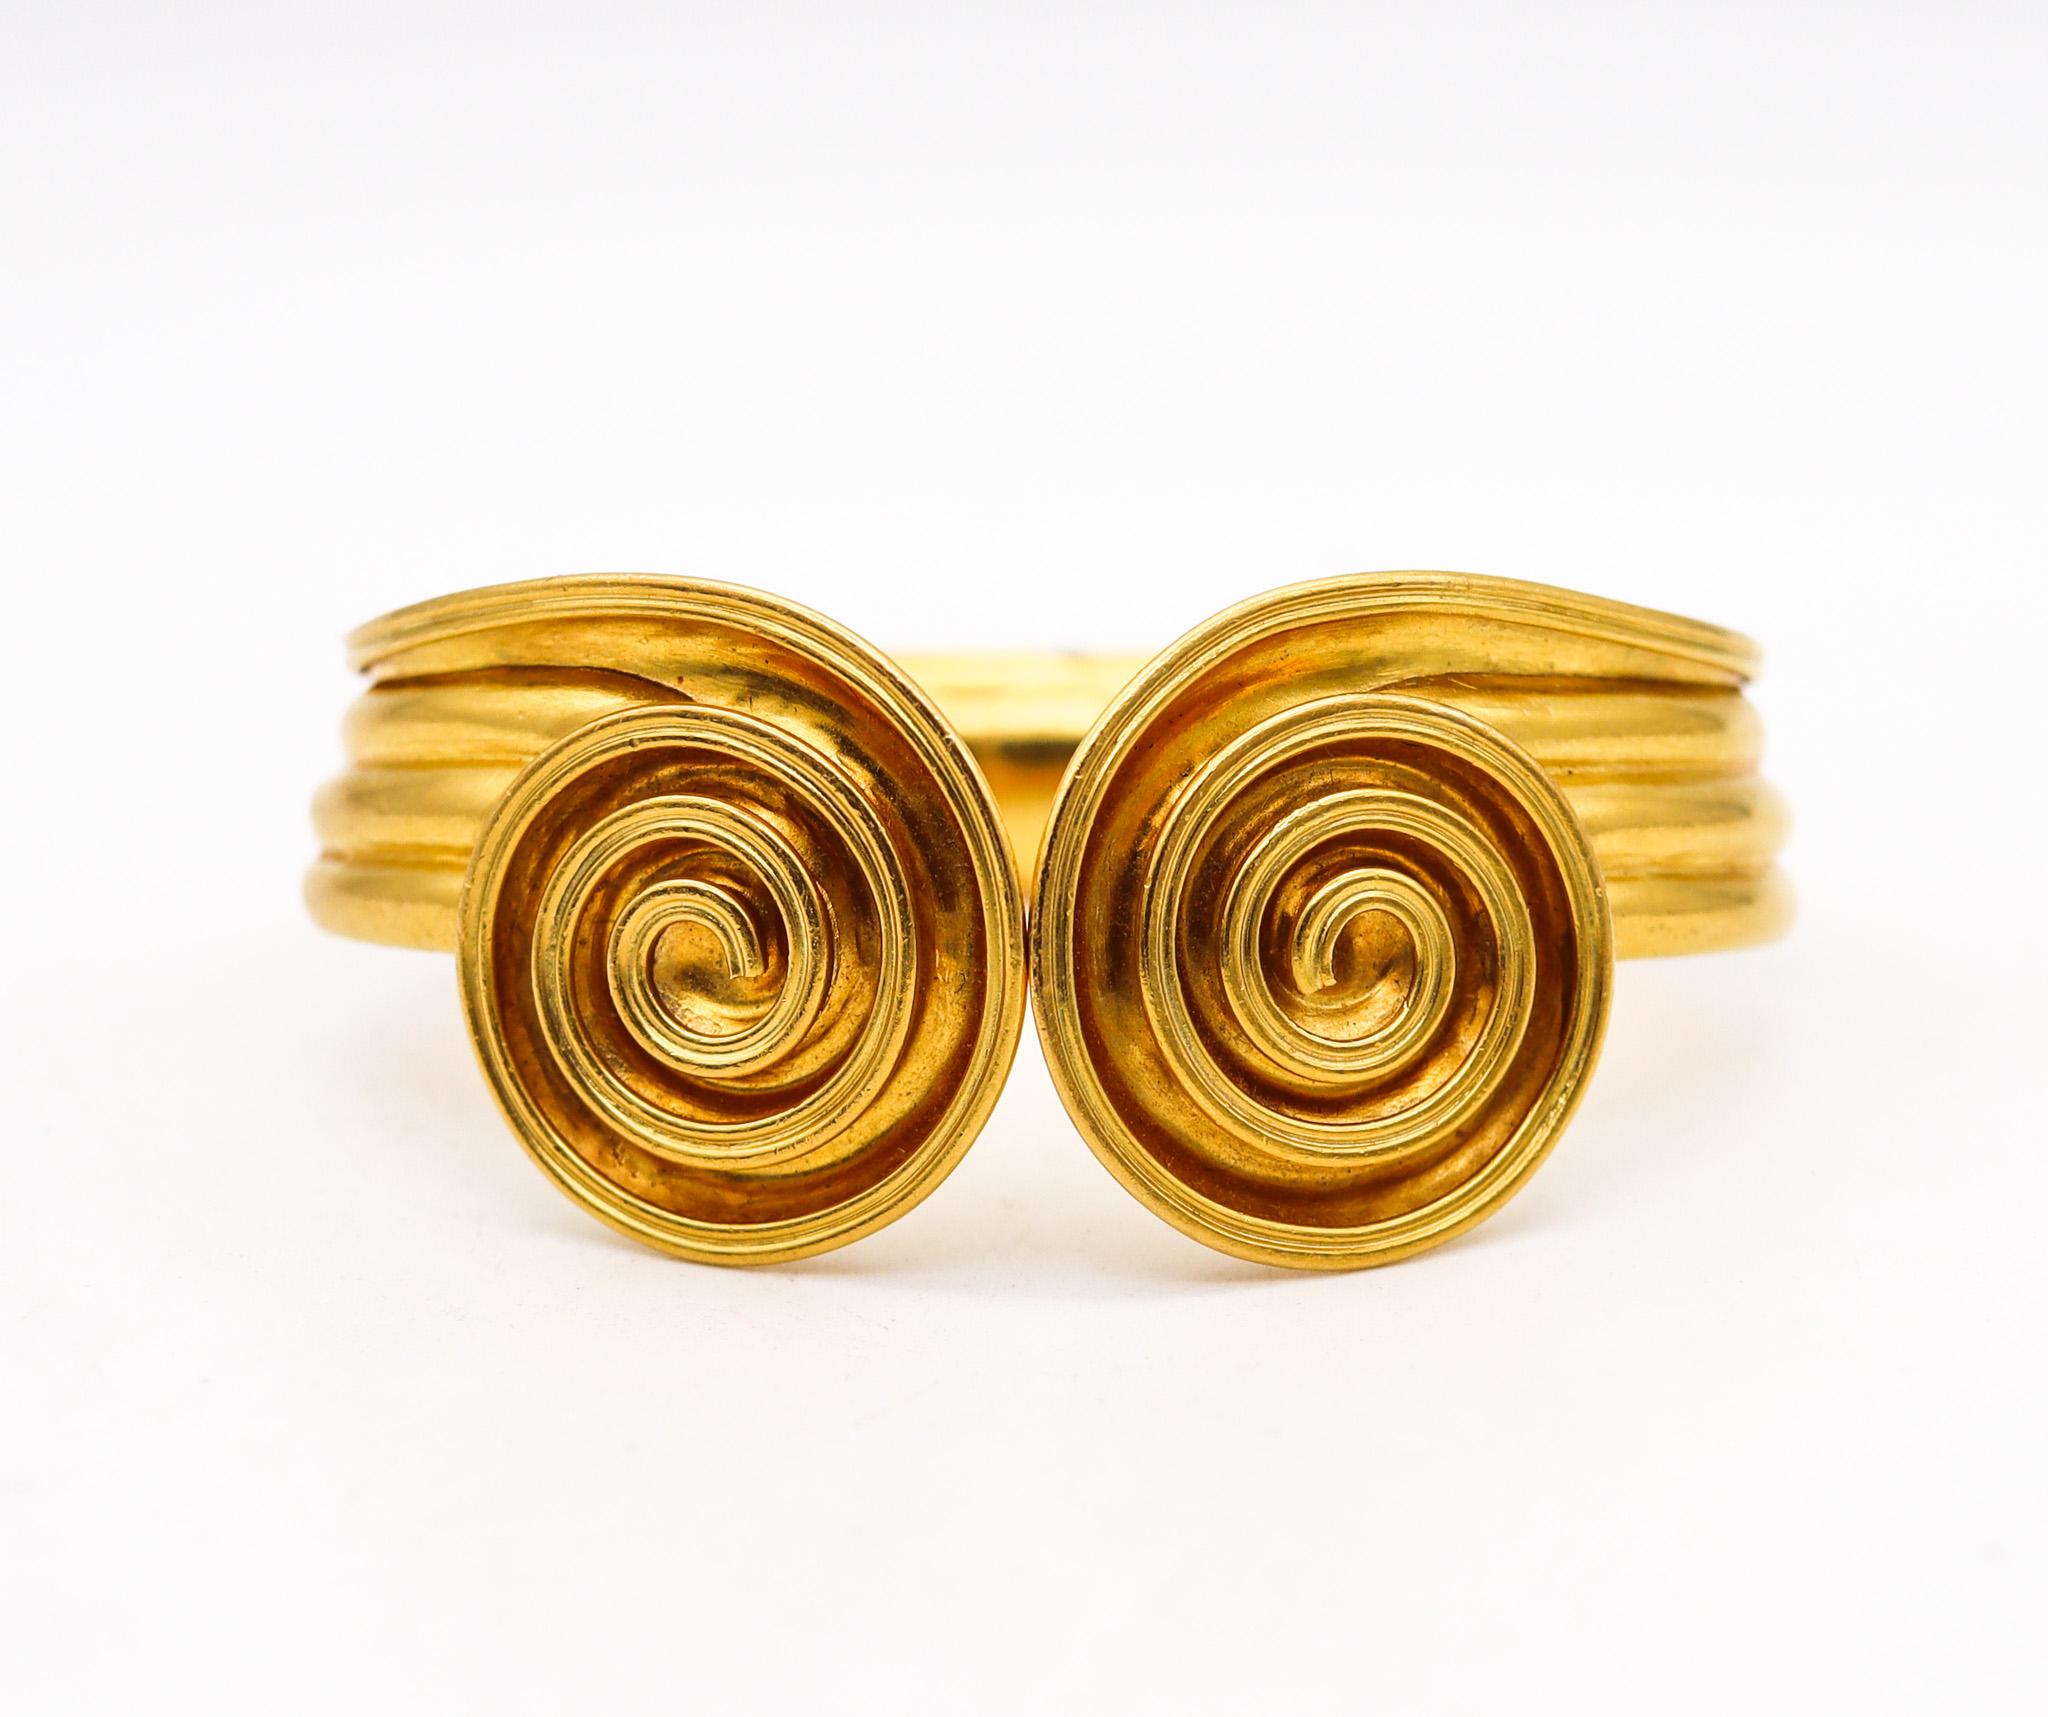 Bangle bracelet designed by Ilias Lalaounis.

Gorgeous bracelet, created in Greece by the jewelry house of Ilias Lalaounis, back in the 1970's. This beautiful vintage and bold bangle are part of the collection named the Minoans and Mycenaeans. Has